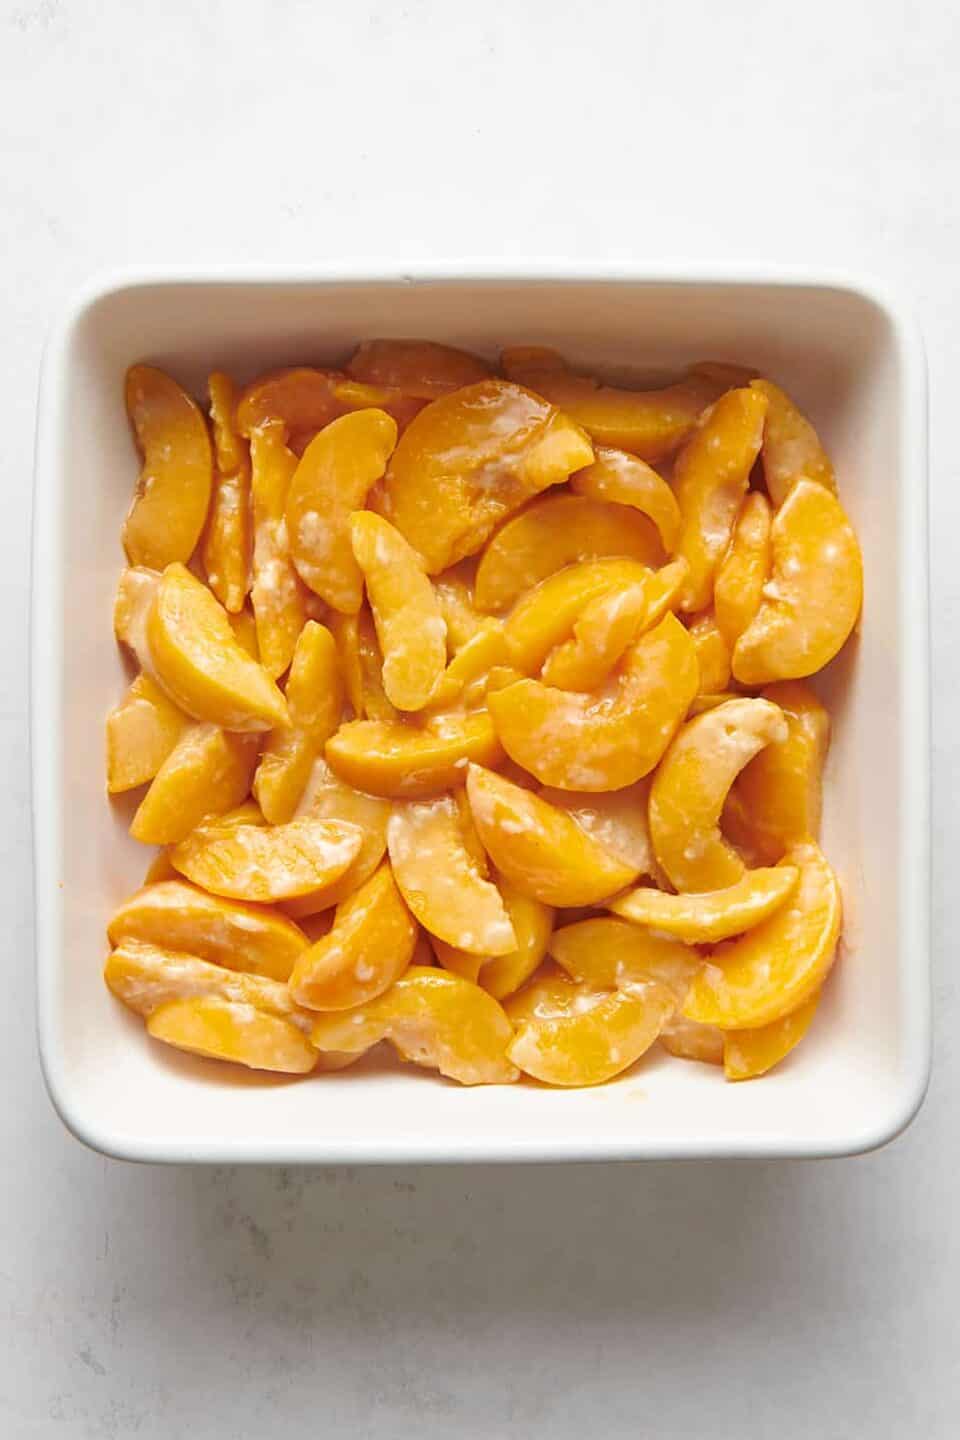 canned sliced peaches in an 8x8 baking dish